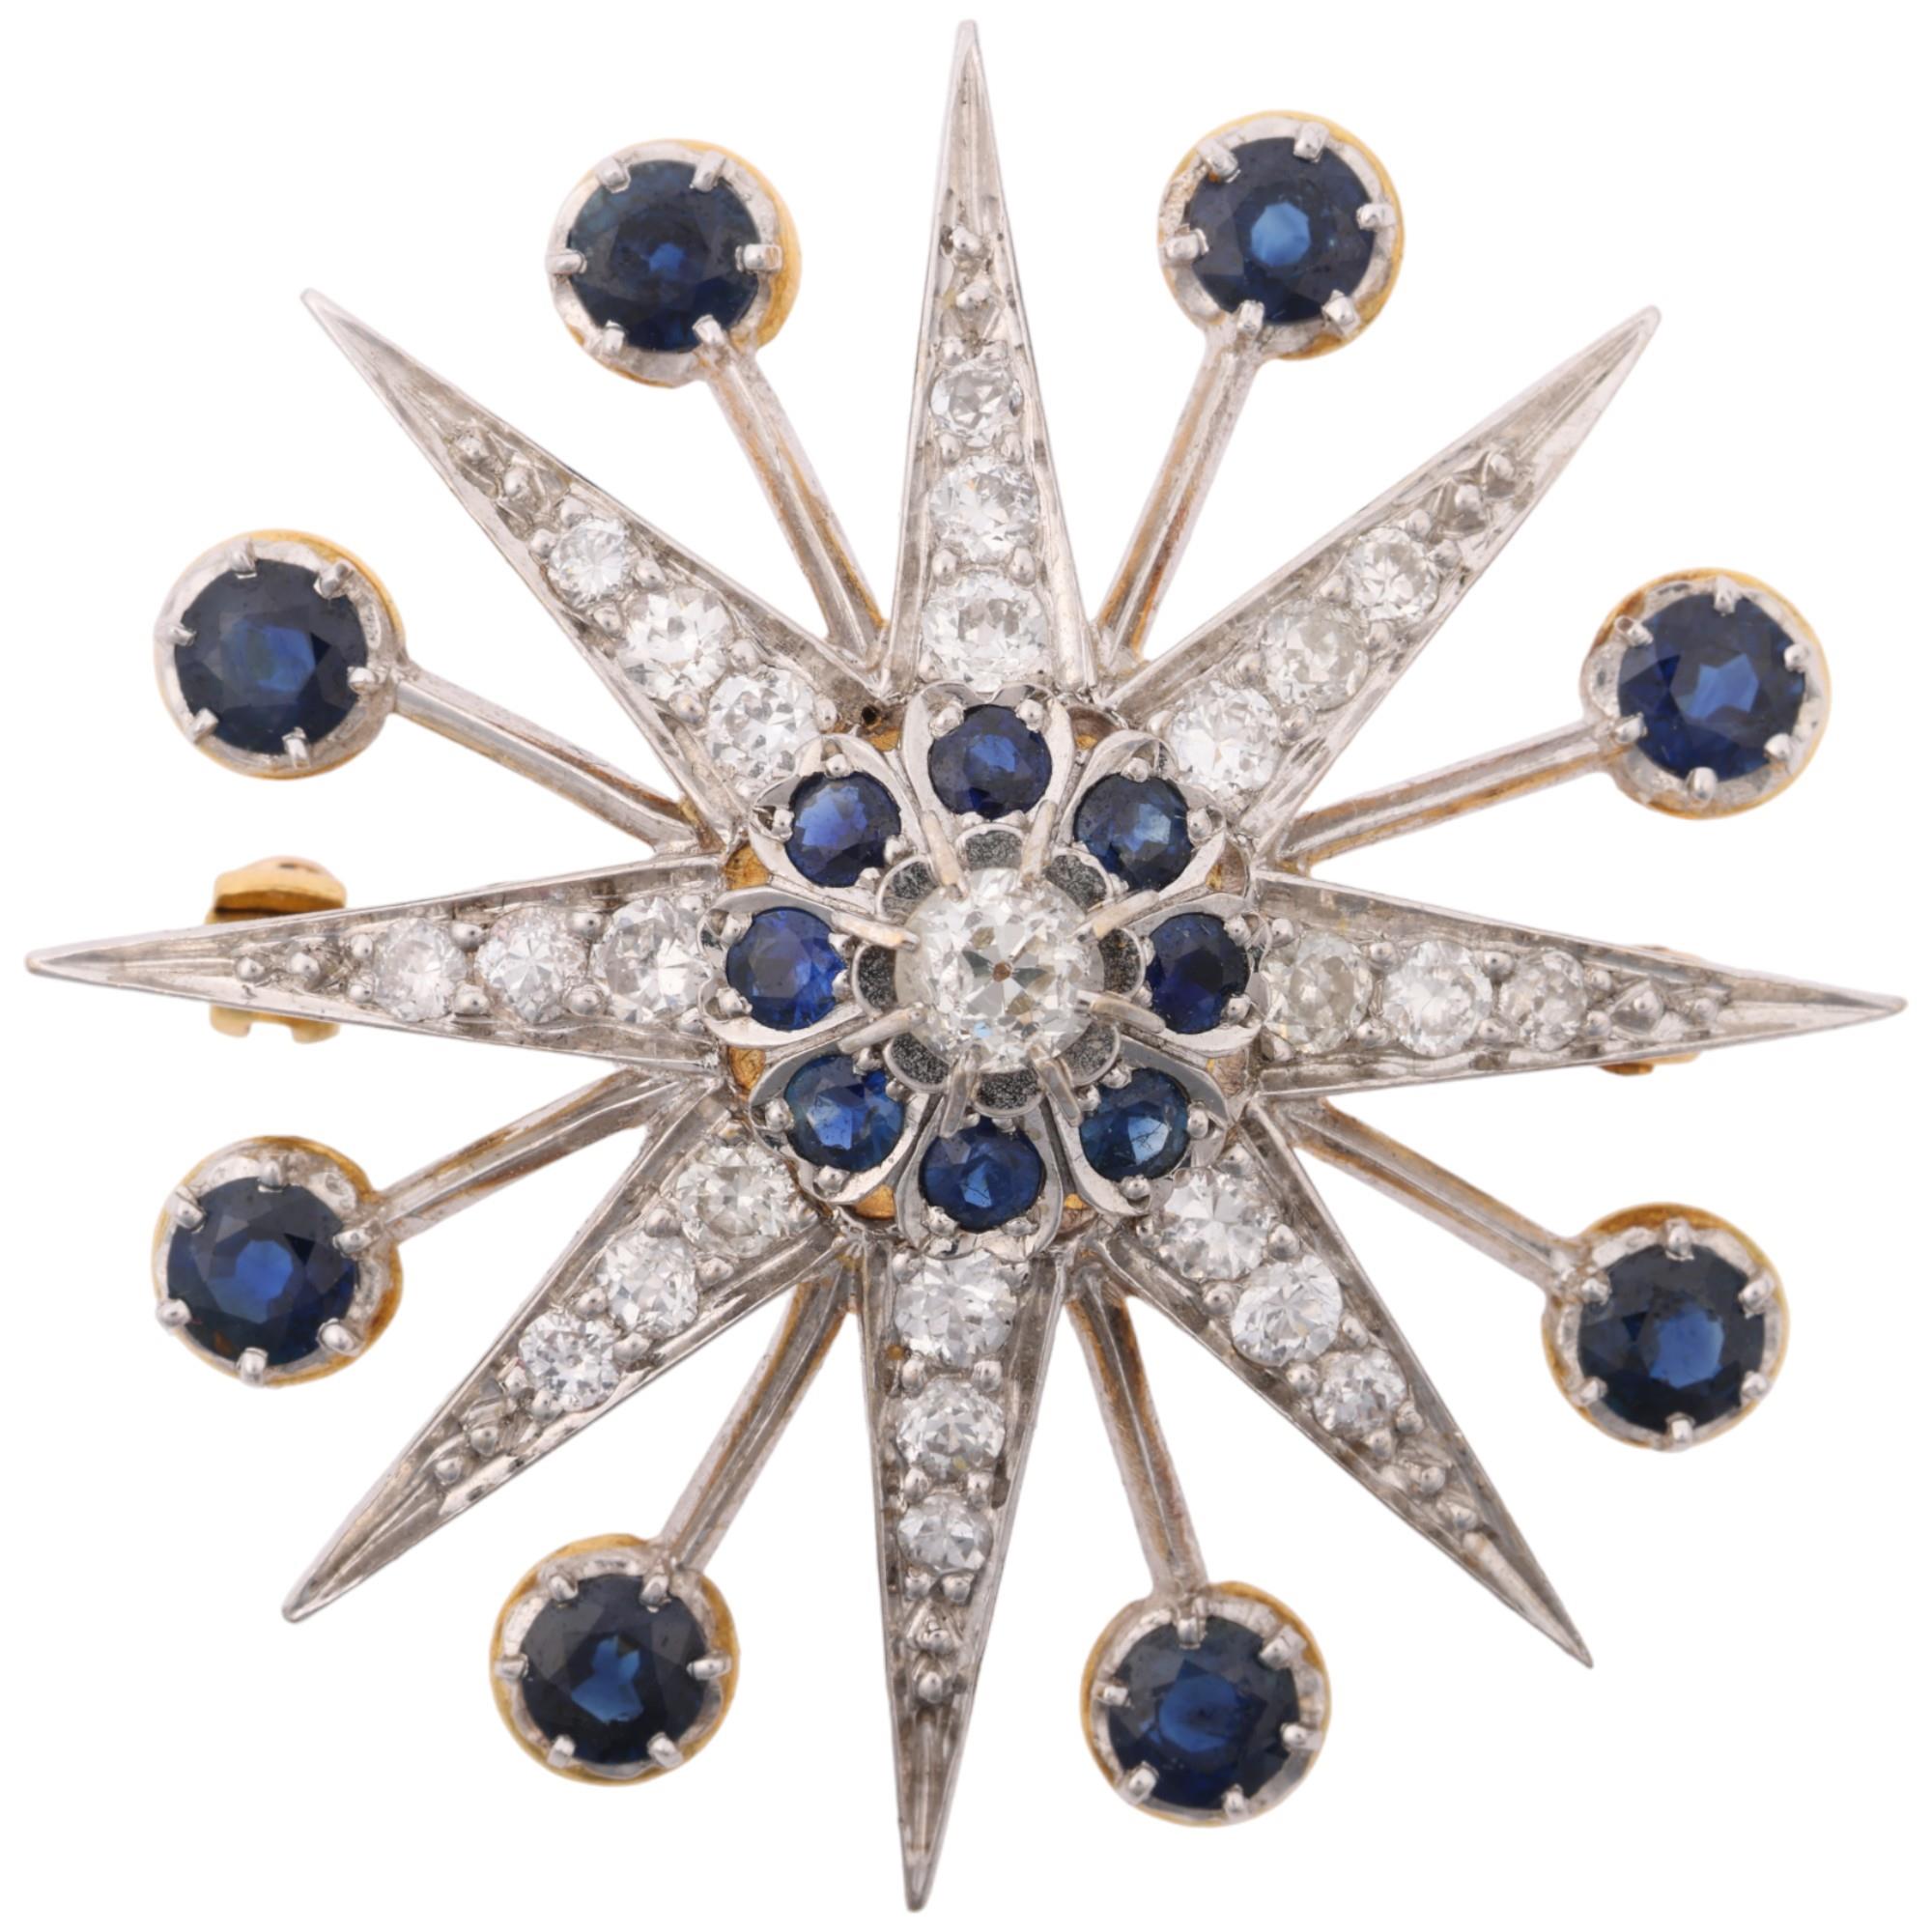 A large modern sapphire and diamond 8-ray starburst brooch, in the Victorian style, set with round-